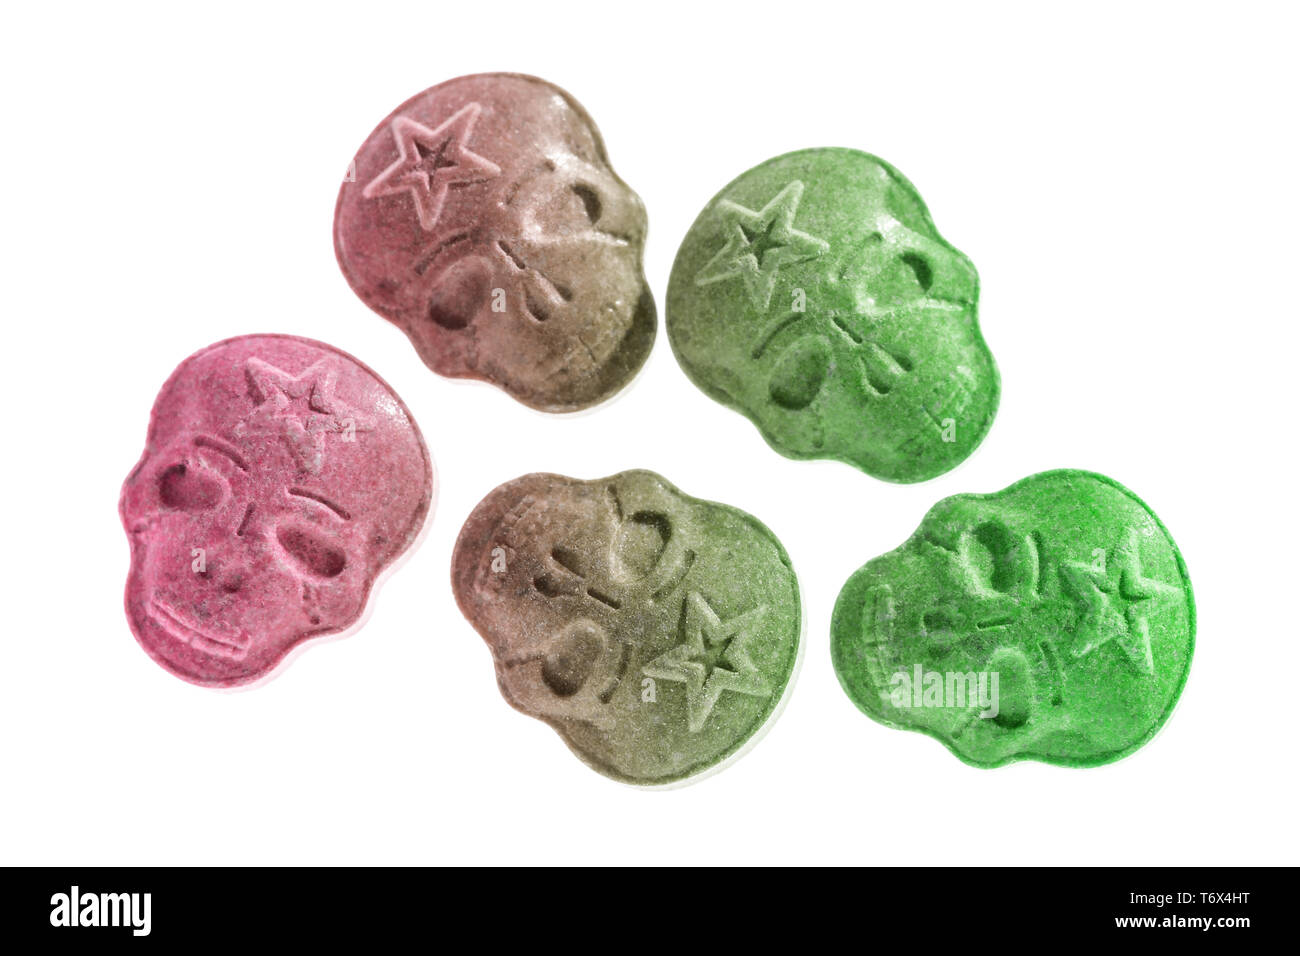 Five K To Green Gradient Army Skull Ecstasy Mdma Amphetamine Or Medication Pills Shaped Like A Skull Isolated On A White Background Stock Photo Alamy